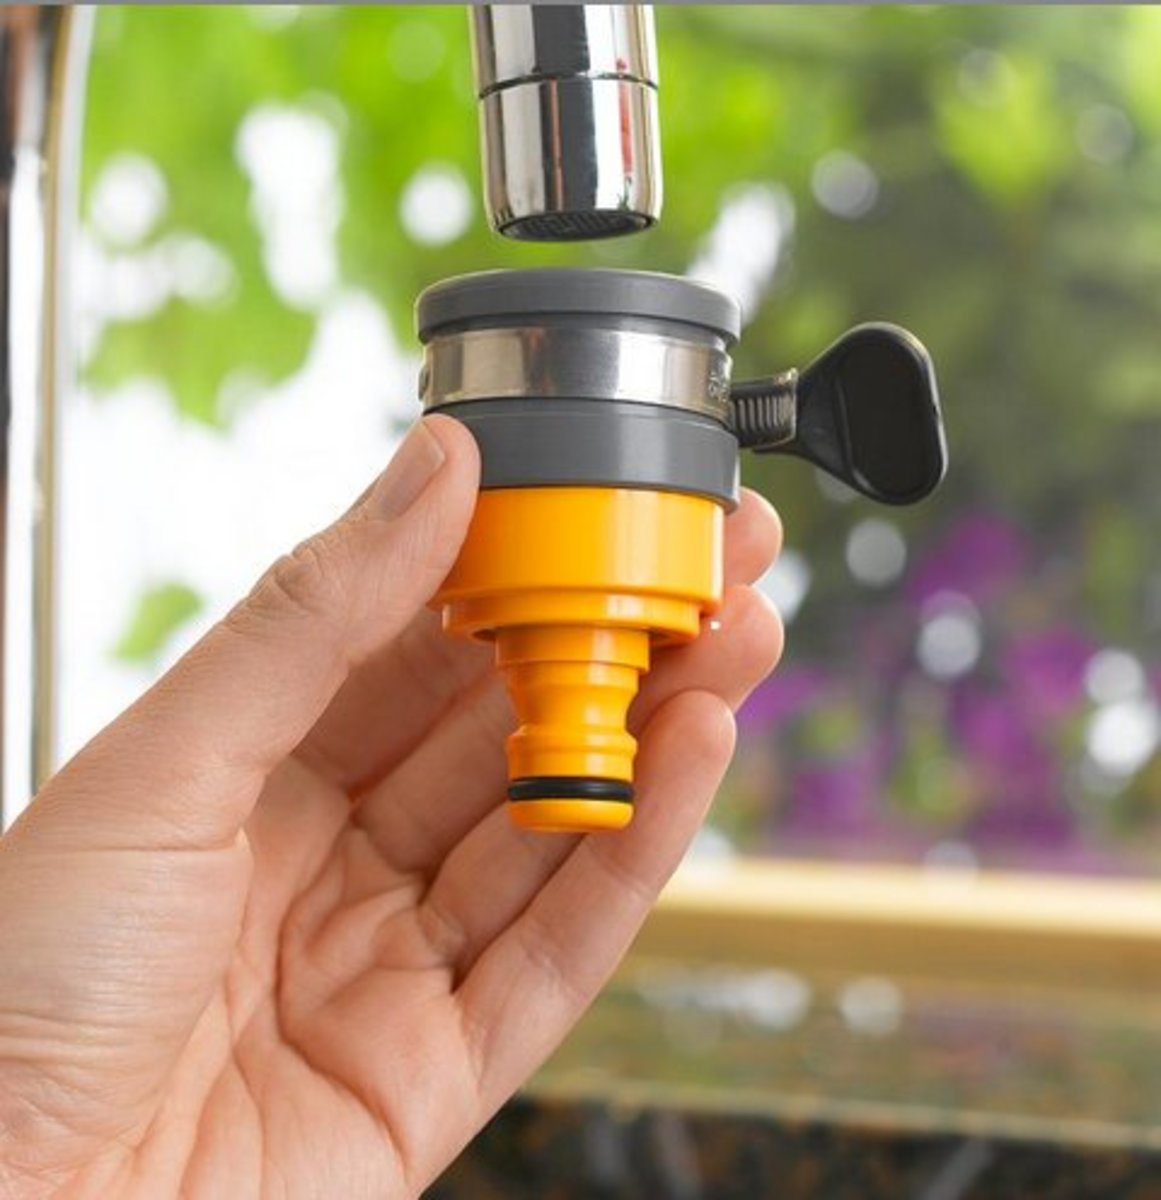 This connector is suitable for larger diameter mixer taps up to 24 mm